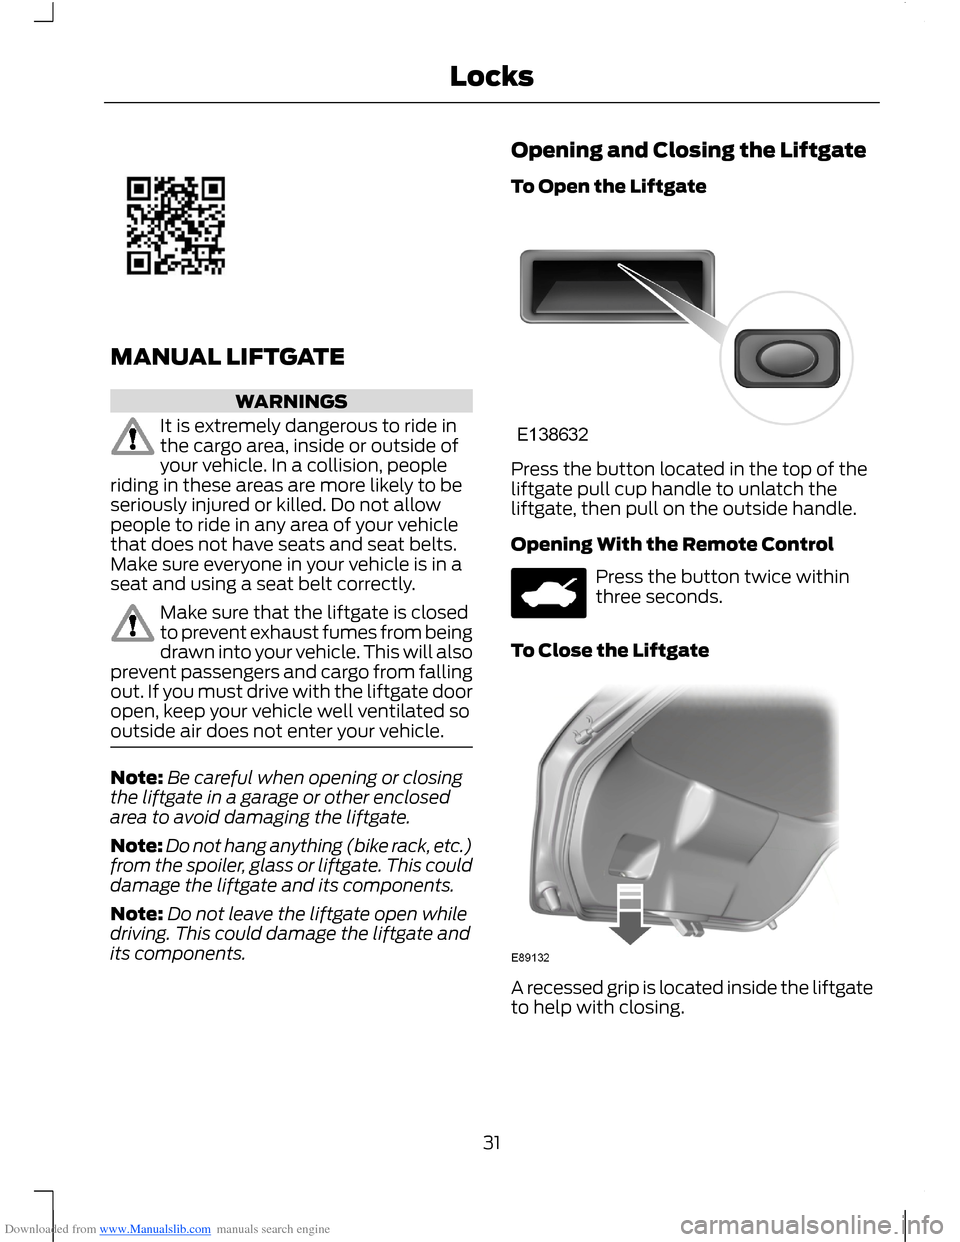 FORD B MAX 2012 1.G Owners Guide Downloaded from www.Manualslib.com manuals search engine MANUAL LIFTGATE
WARNINGS
It is extremely dangerous to ride inthe cargo area, inside or outside ofyour vehicle. In a collision, peopleriding in 